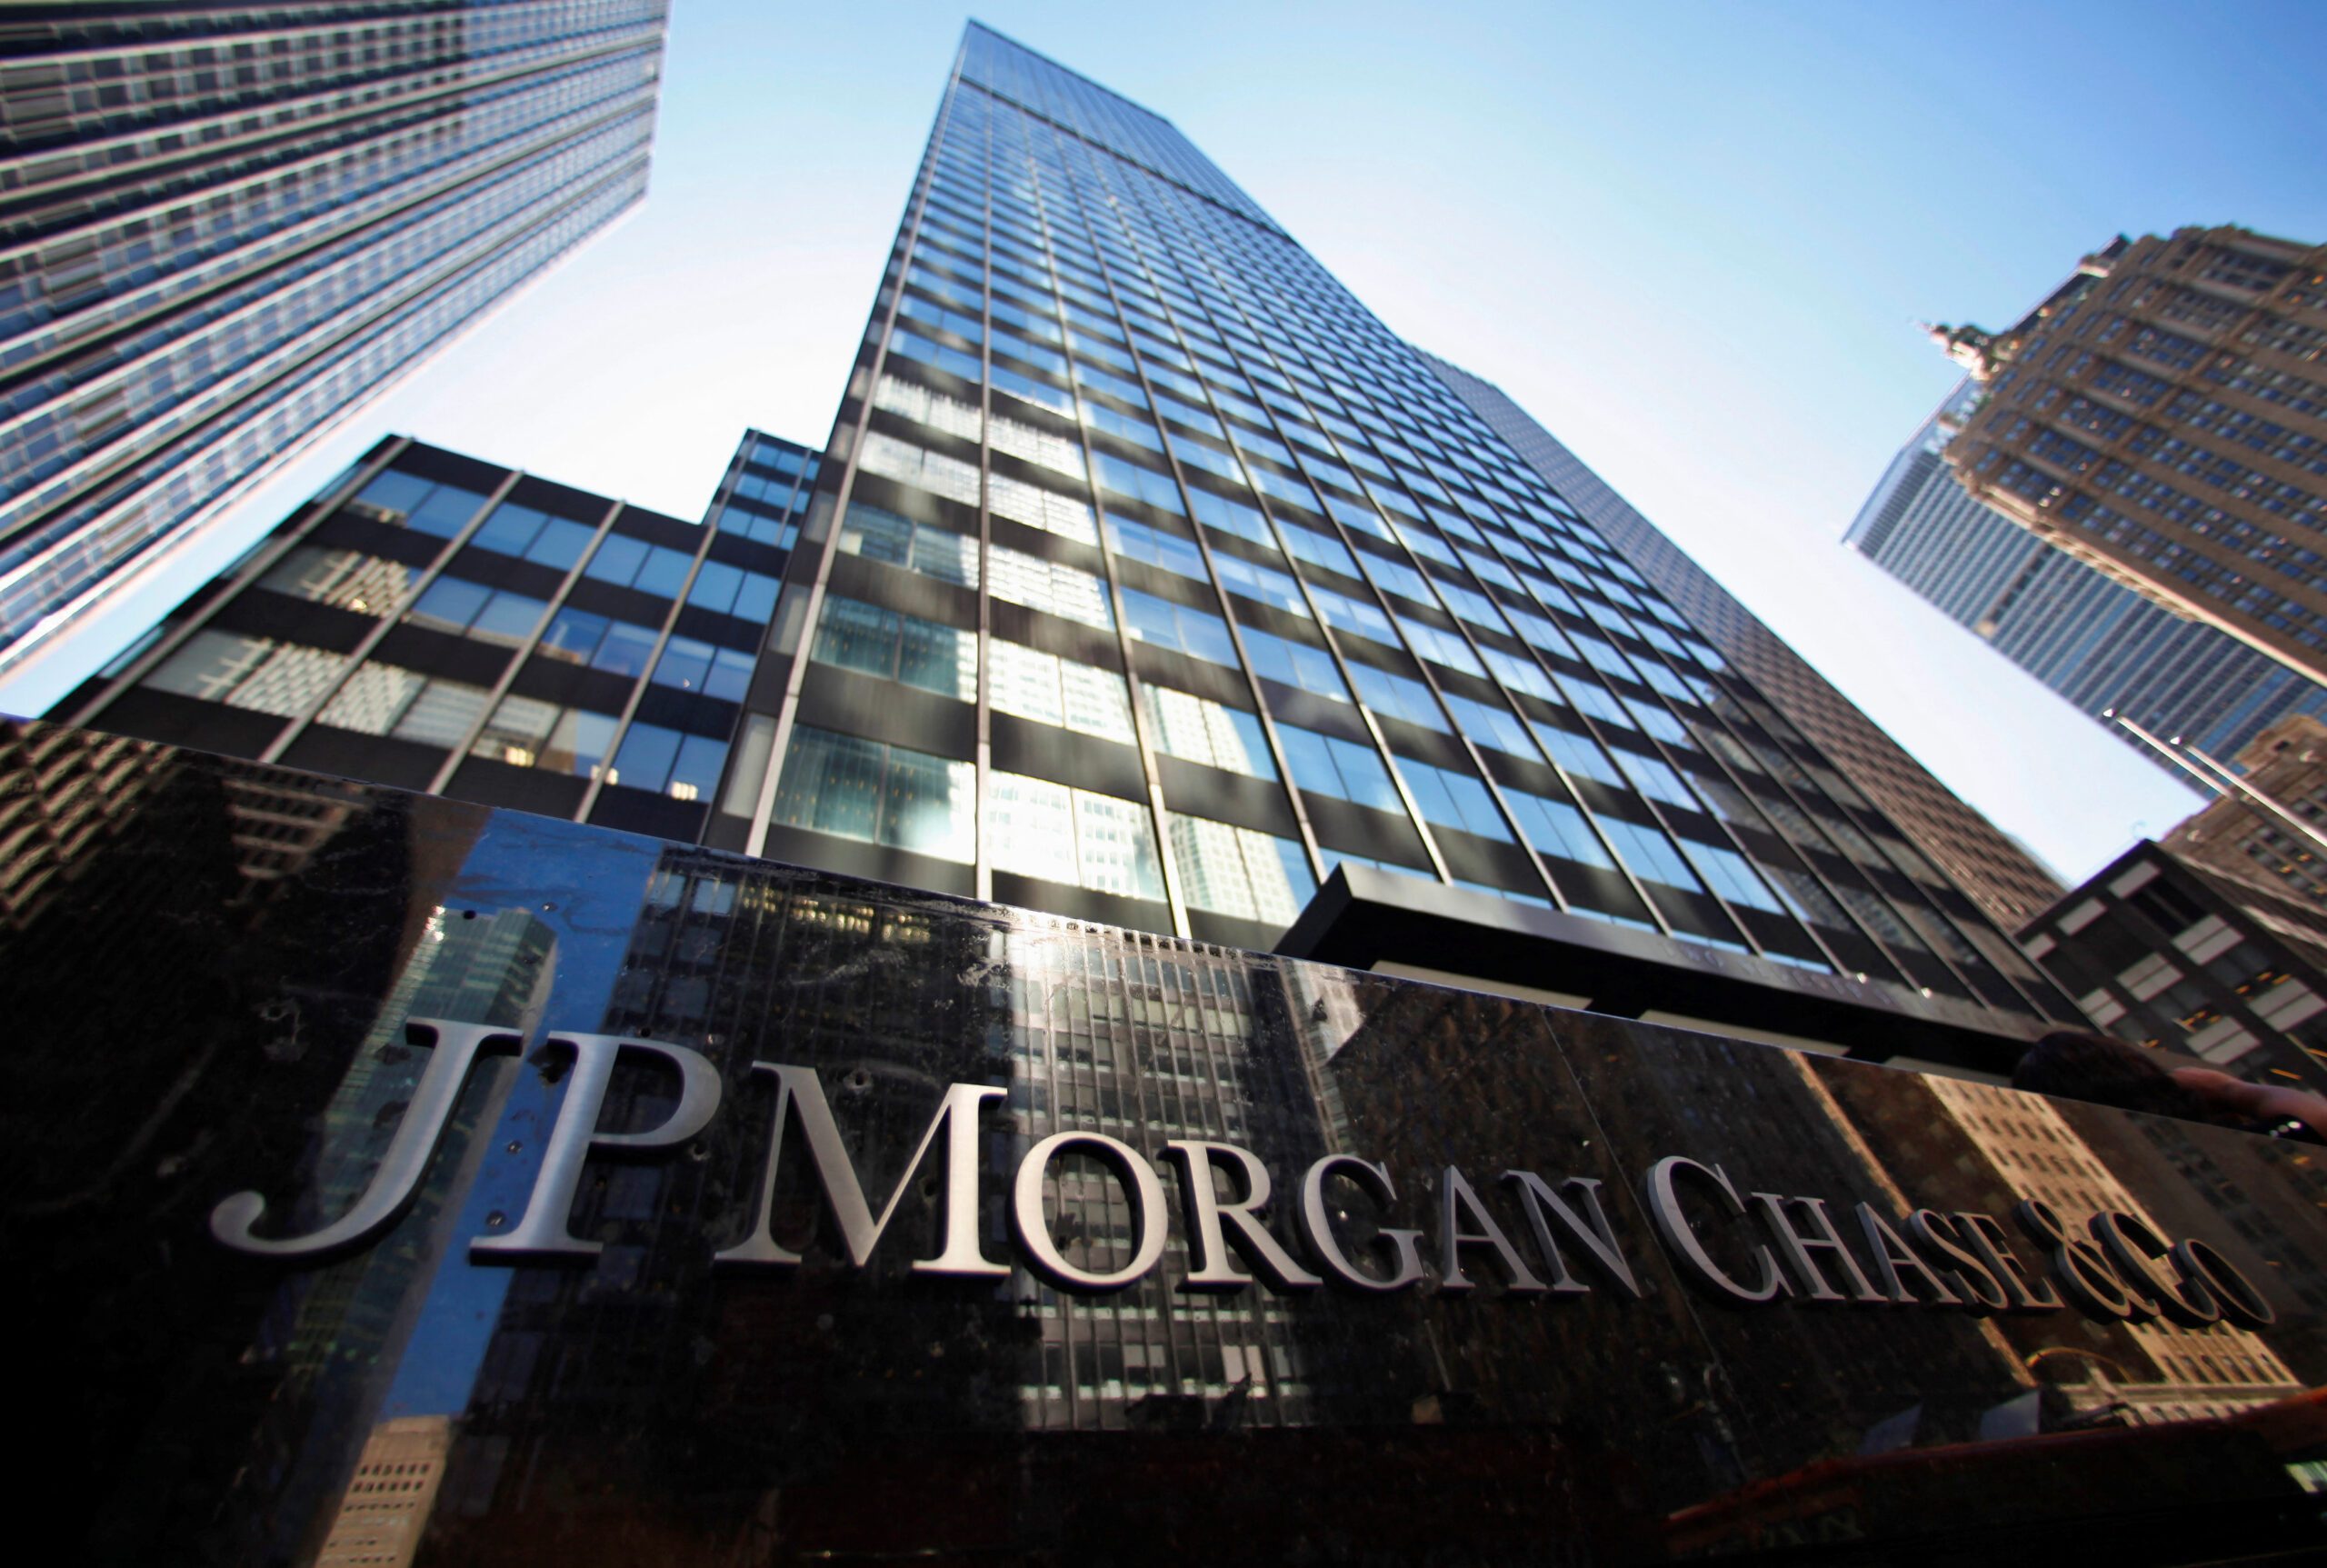 JPMorgan to expand payments, corporate banking businesses in Abu Dhabi